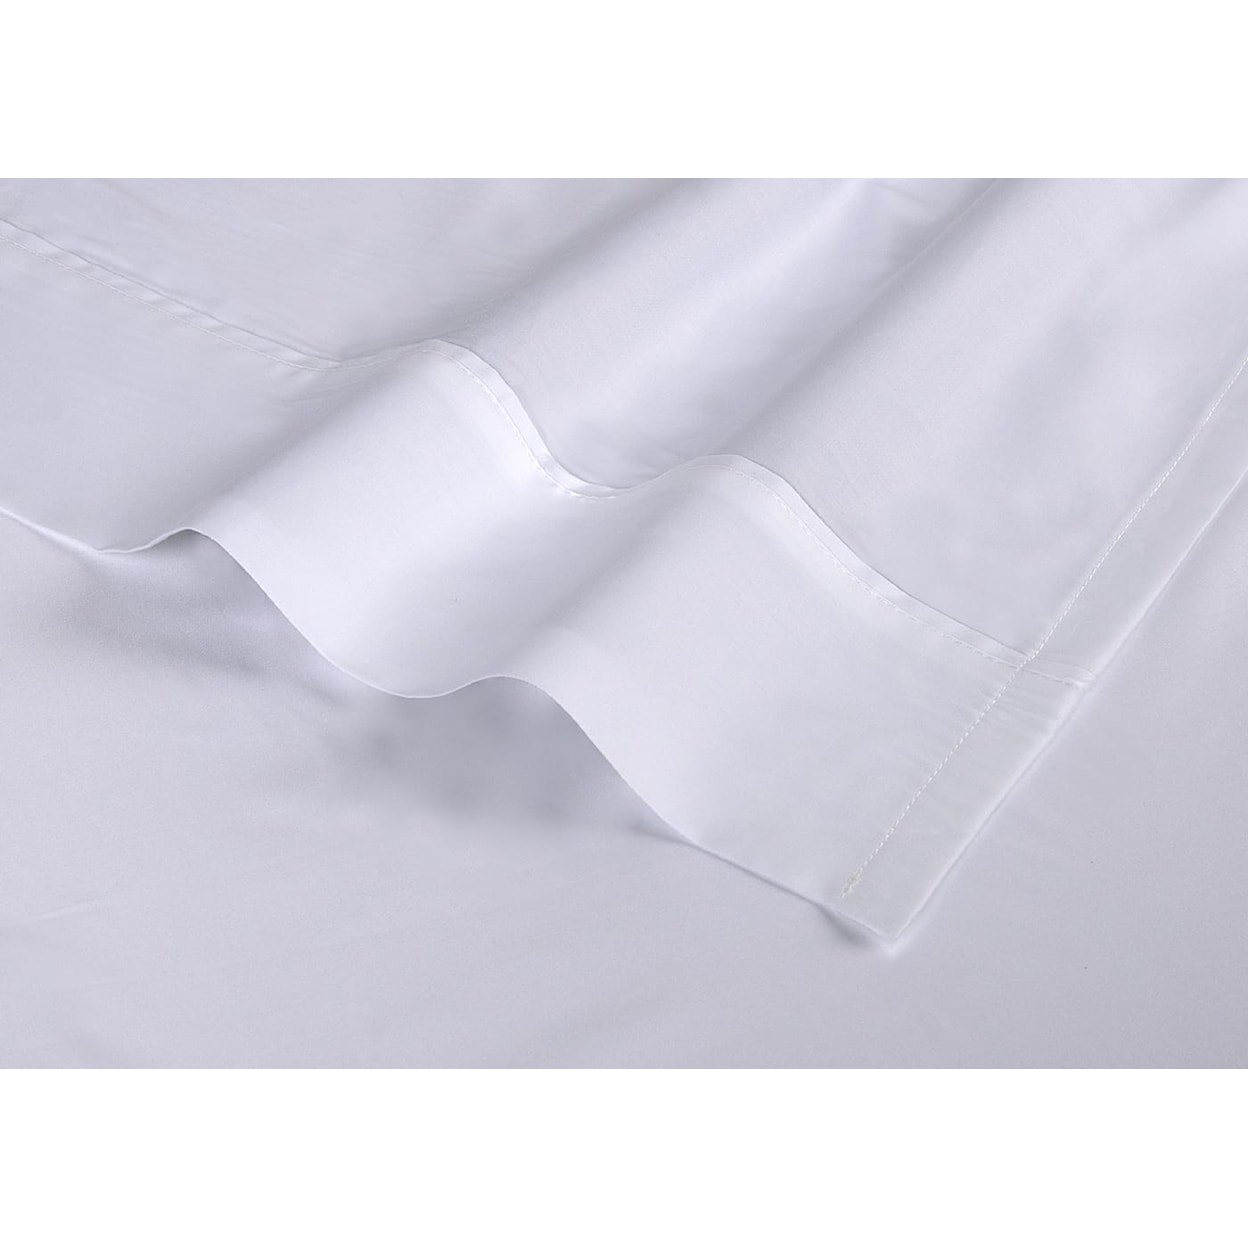 Bedgear Hyper-Cotton Performance Sheets Queen Quick Dry Performance Sheets